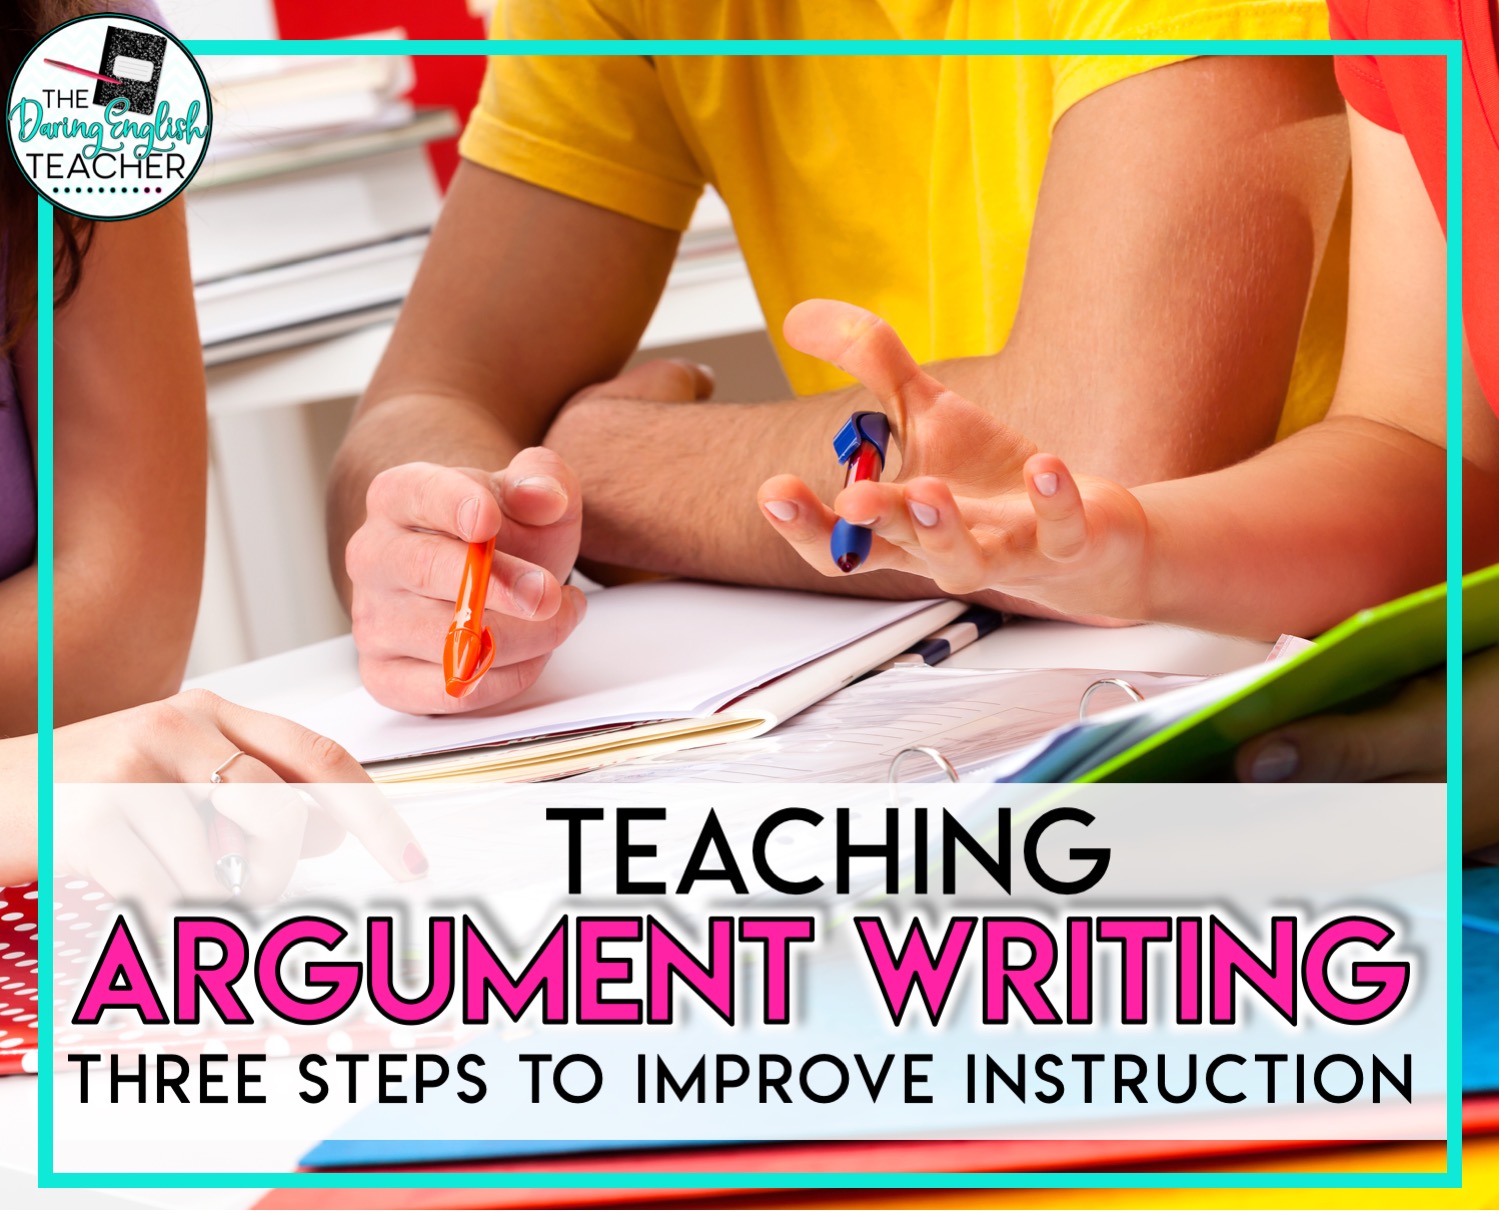 How to Teach Argument Writing: 3 Simple Steps to Improve Instruction